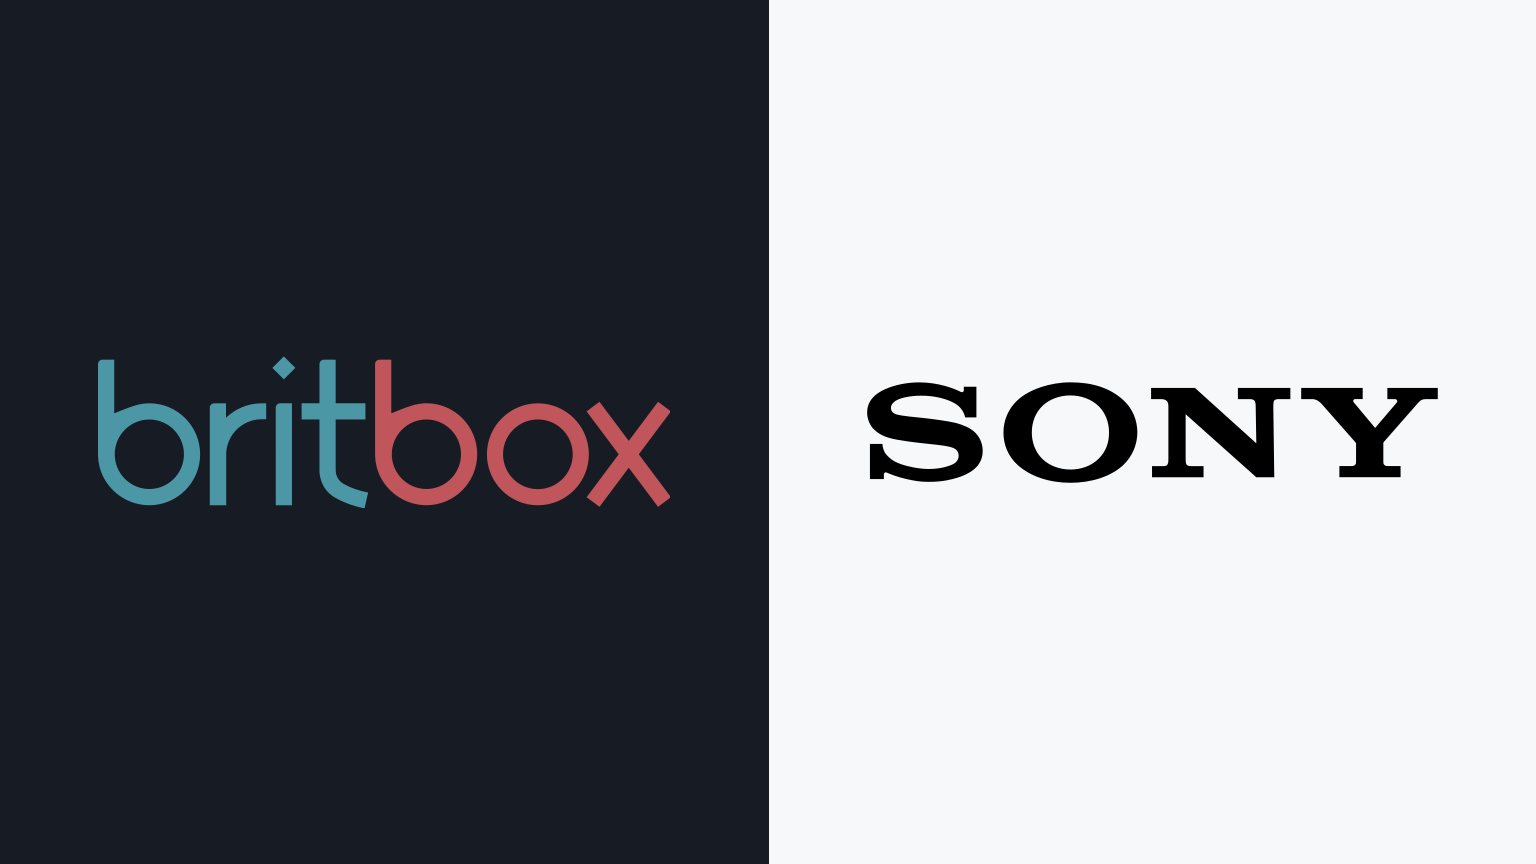 How to get Britbox on LG and Sony Smart TV